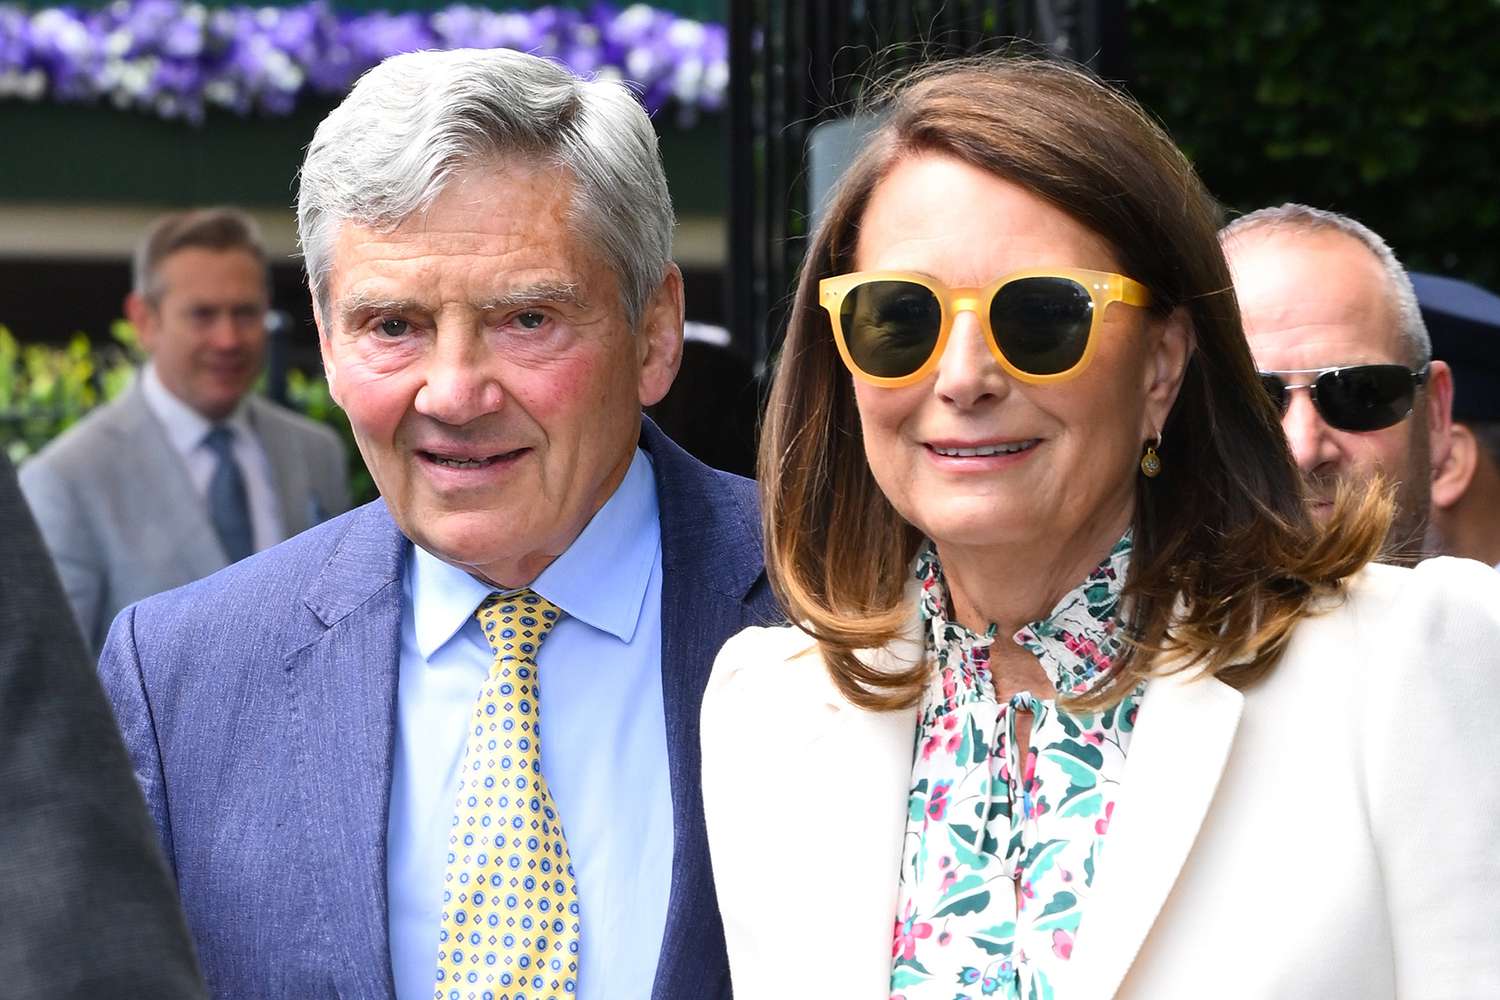 Kate Middleton’s Parents Attend Wimbledon as Organizers Remain Hopeful that She Will Continue Tournament Tradition amid Cancer Treatment